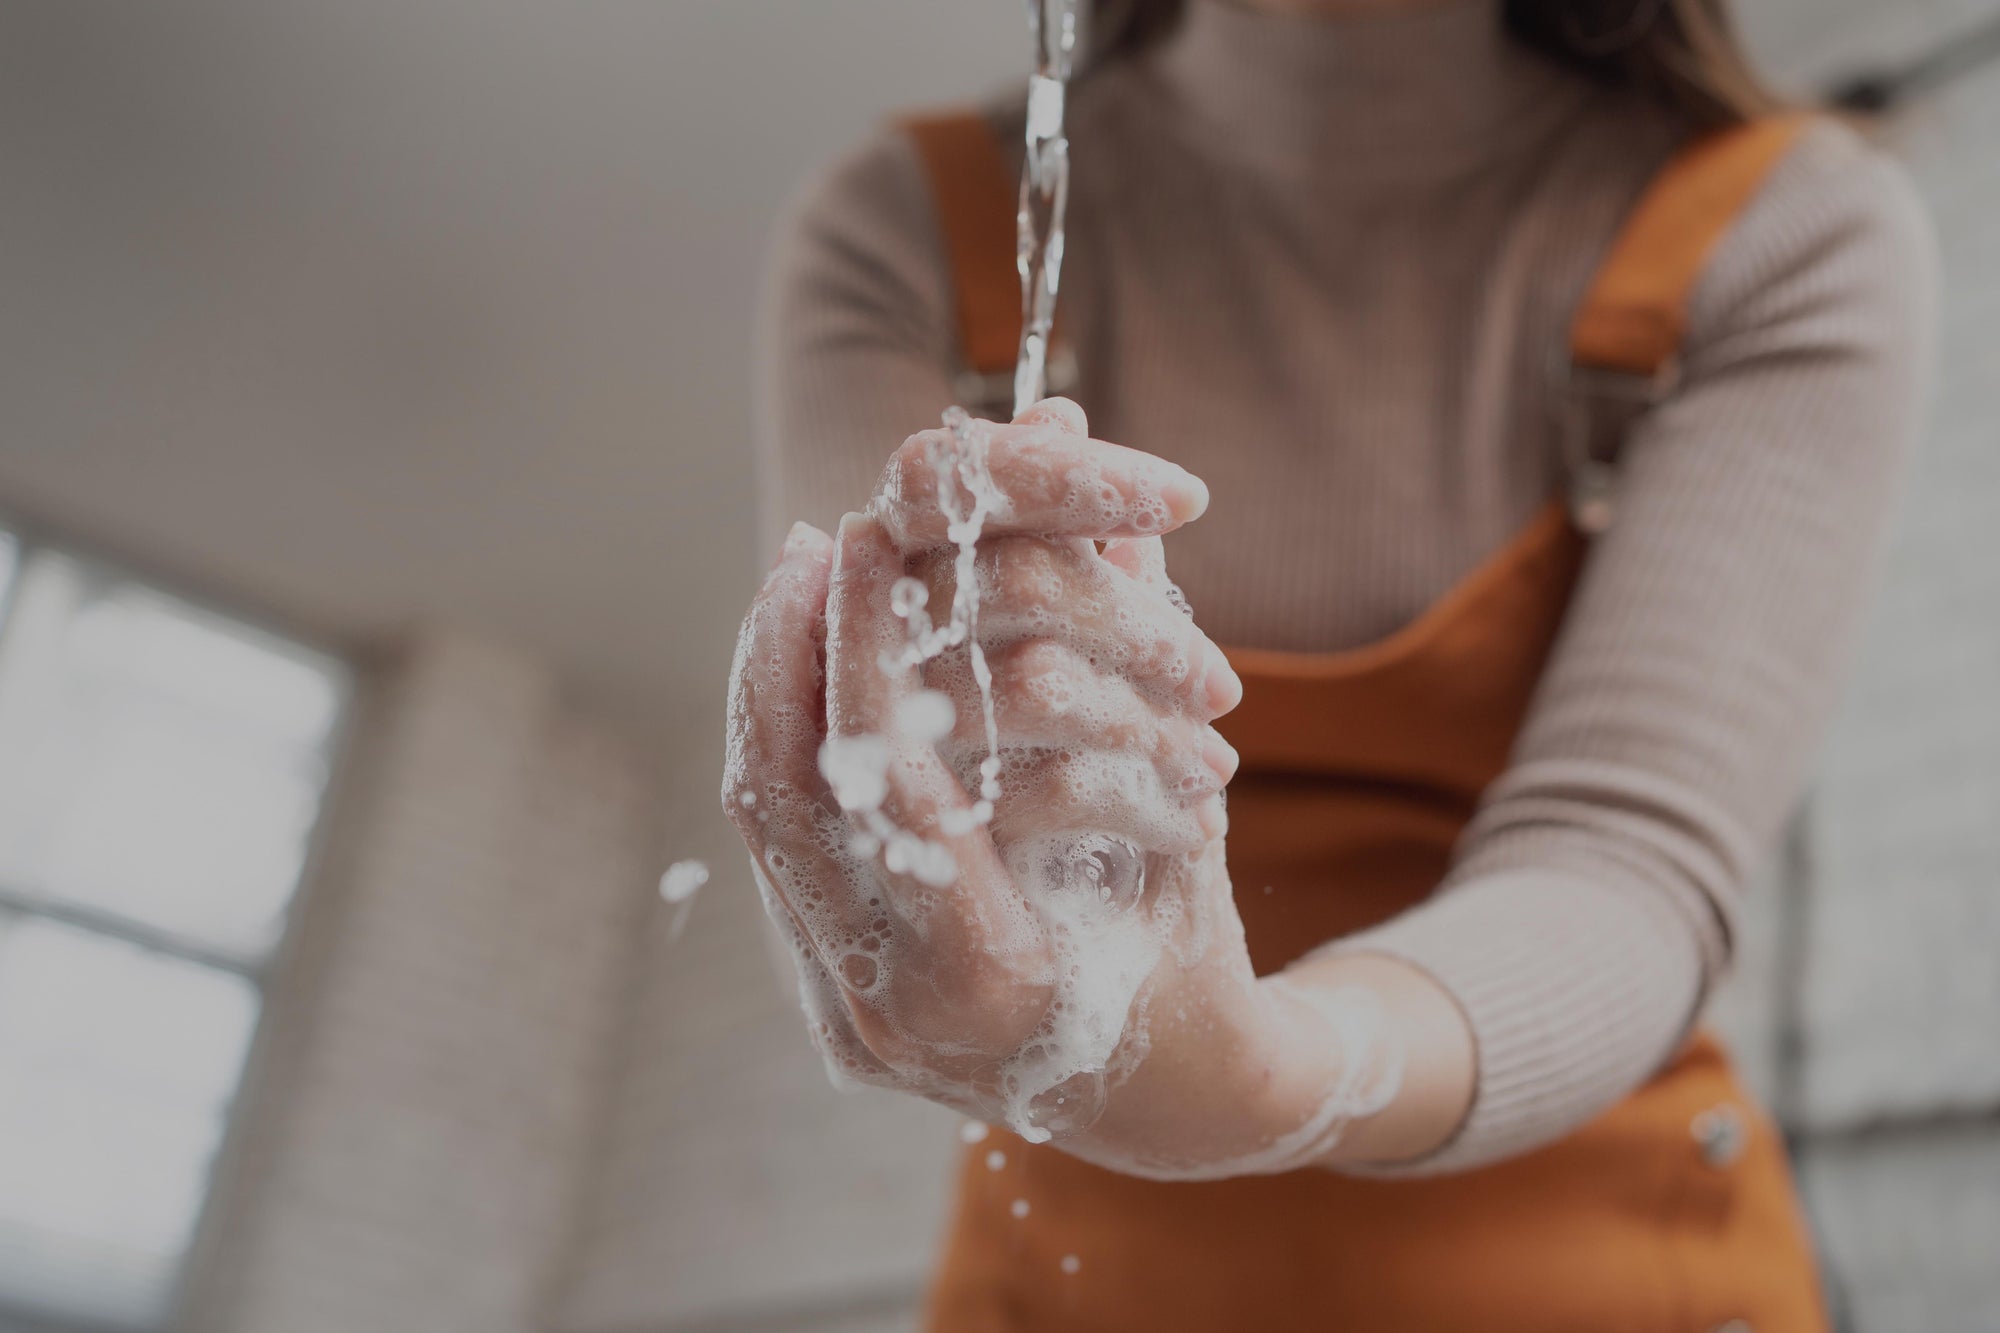 What Are the Best Ways to Sanitize Your Home?